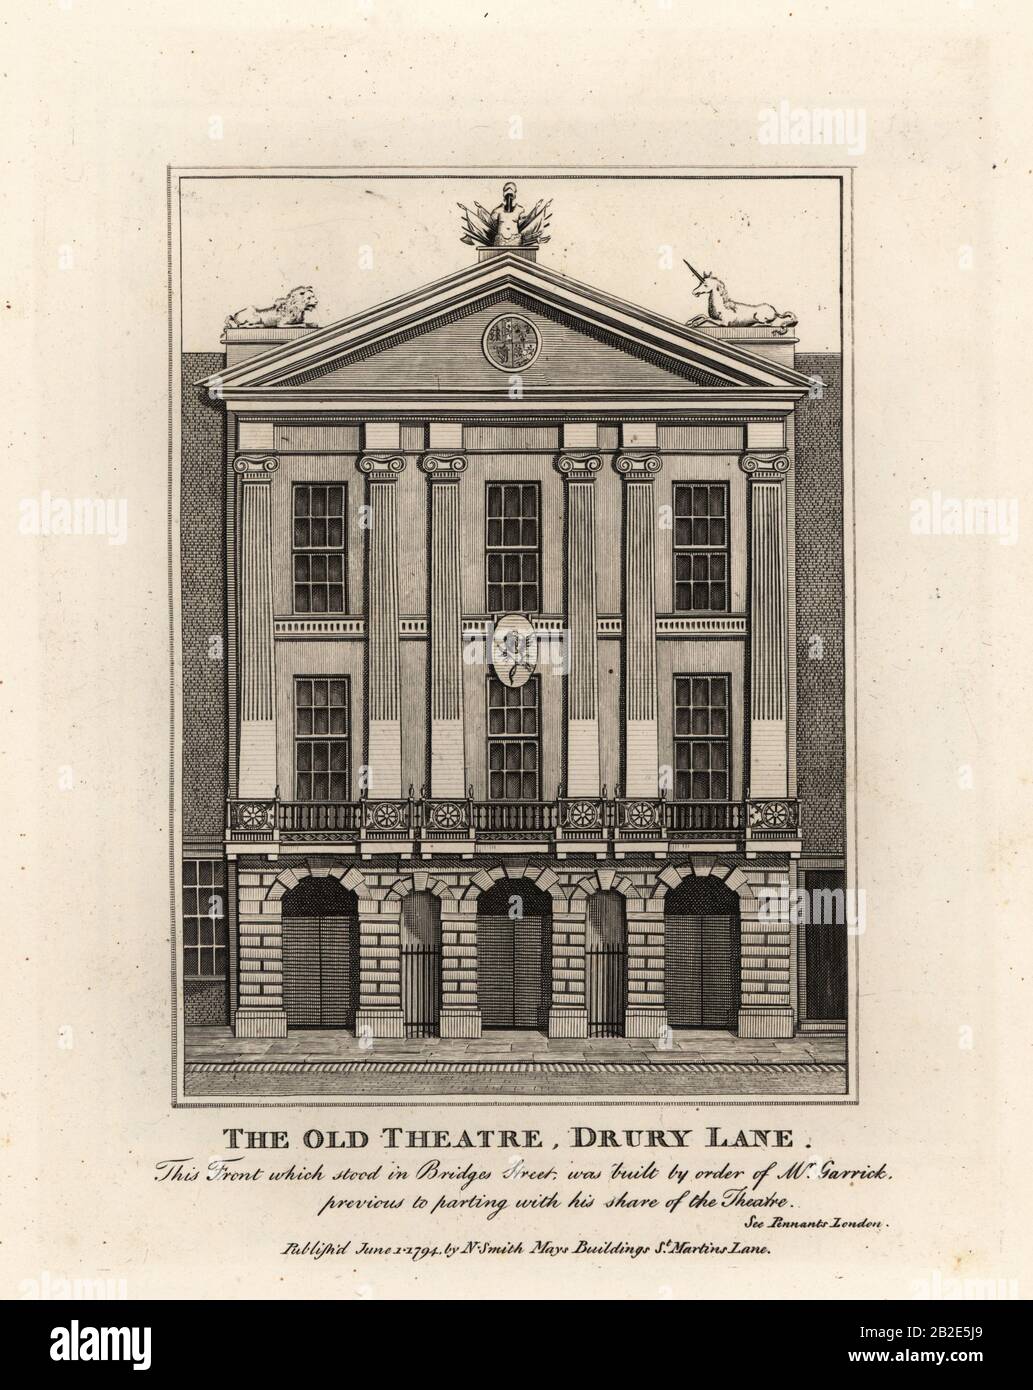 Front of the Old Theatre, Drury Lane, 1794. Facade built by the actor and manager David Garrick. Copperplate engraving by John Thomas Smith after original drawings by members of the Society of Antiquaries from his J.T. Smith’s Antiquities of London and its Environs, J. Sewell, R. Folder, J. Simco, London, 1794. Stock Photo